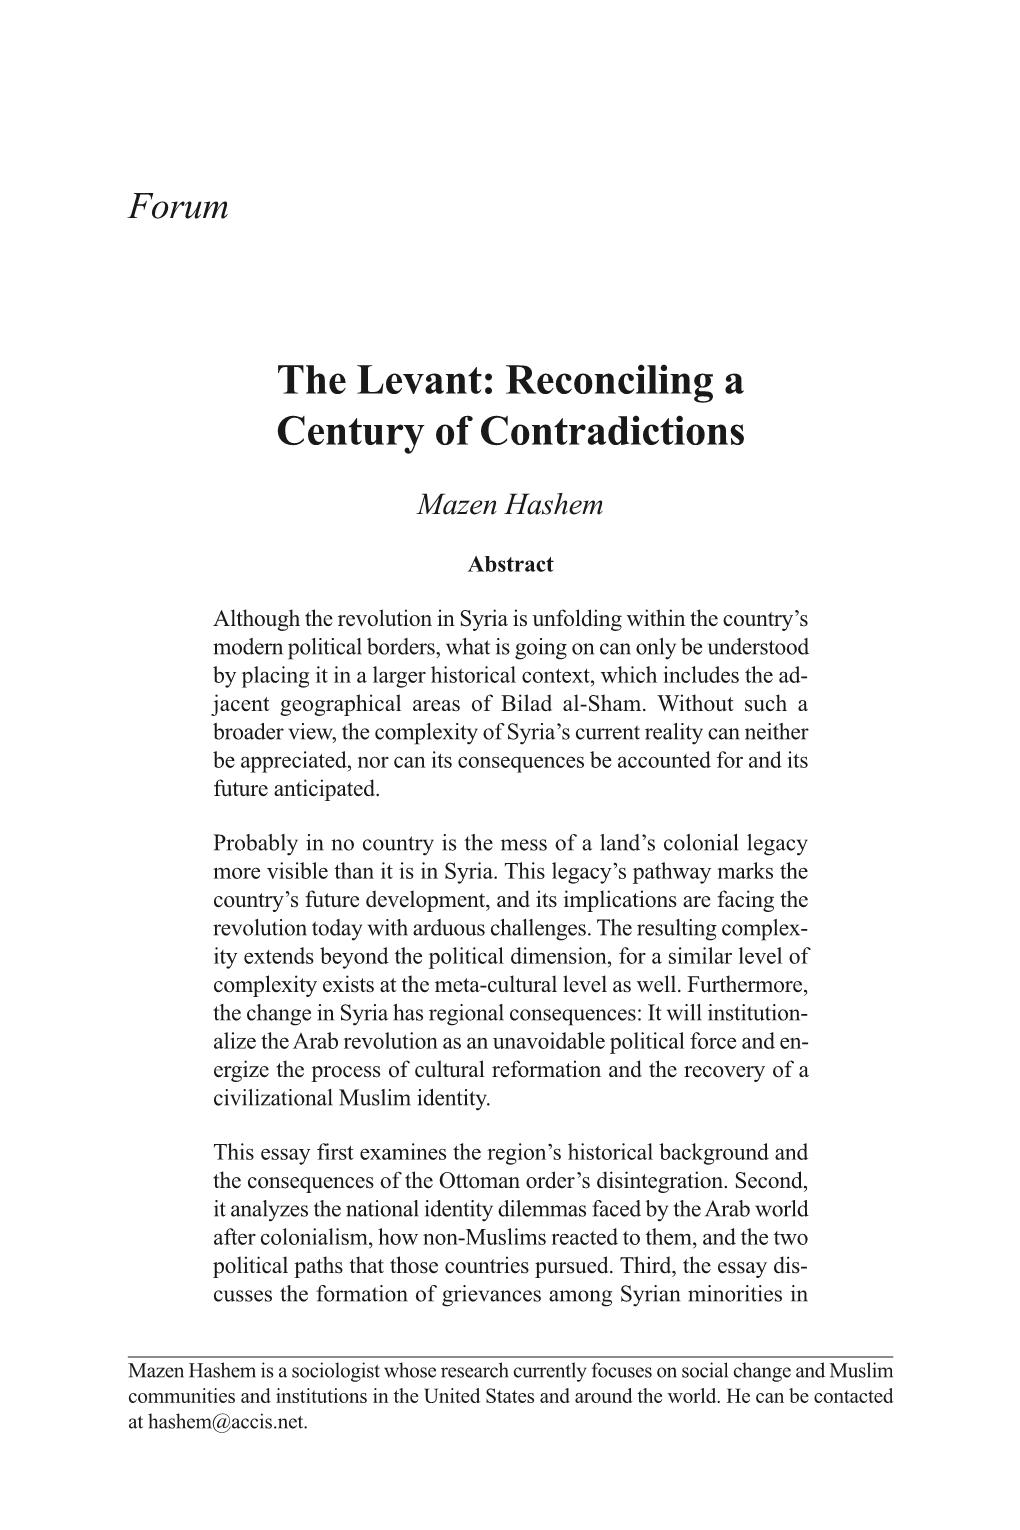 The Levant: Reconciling a Century of Contradictions